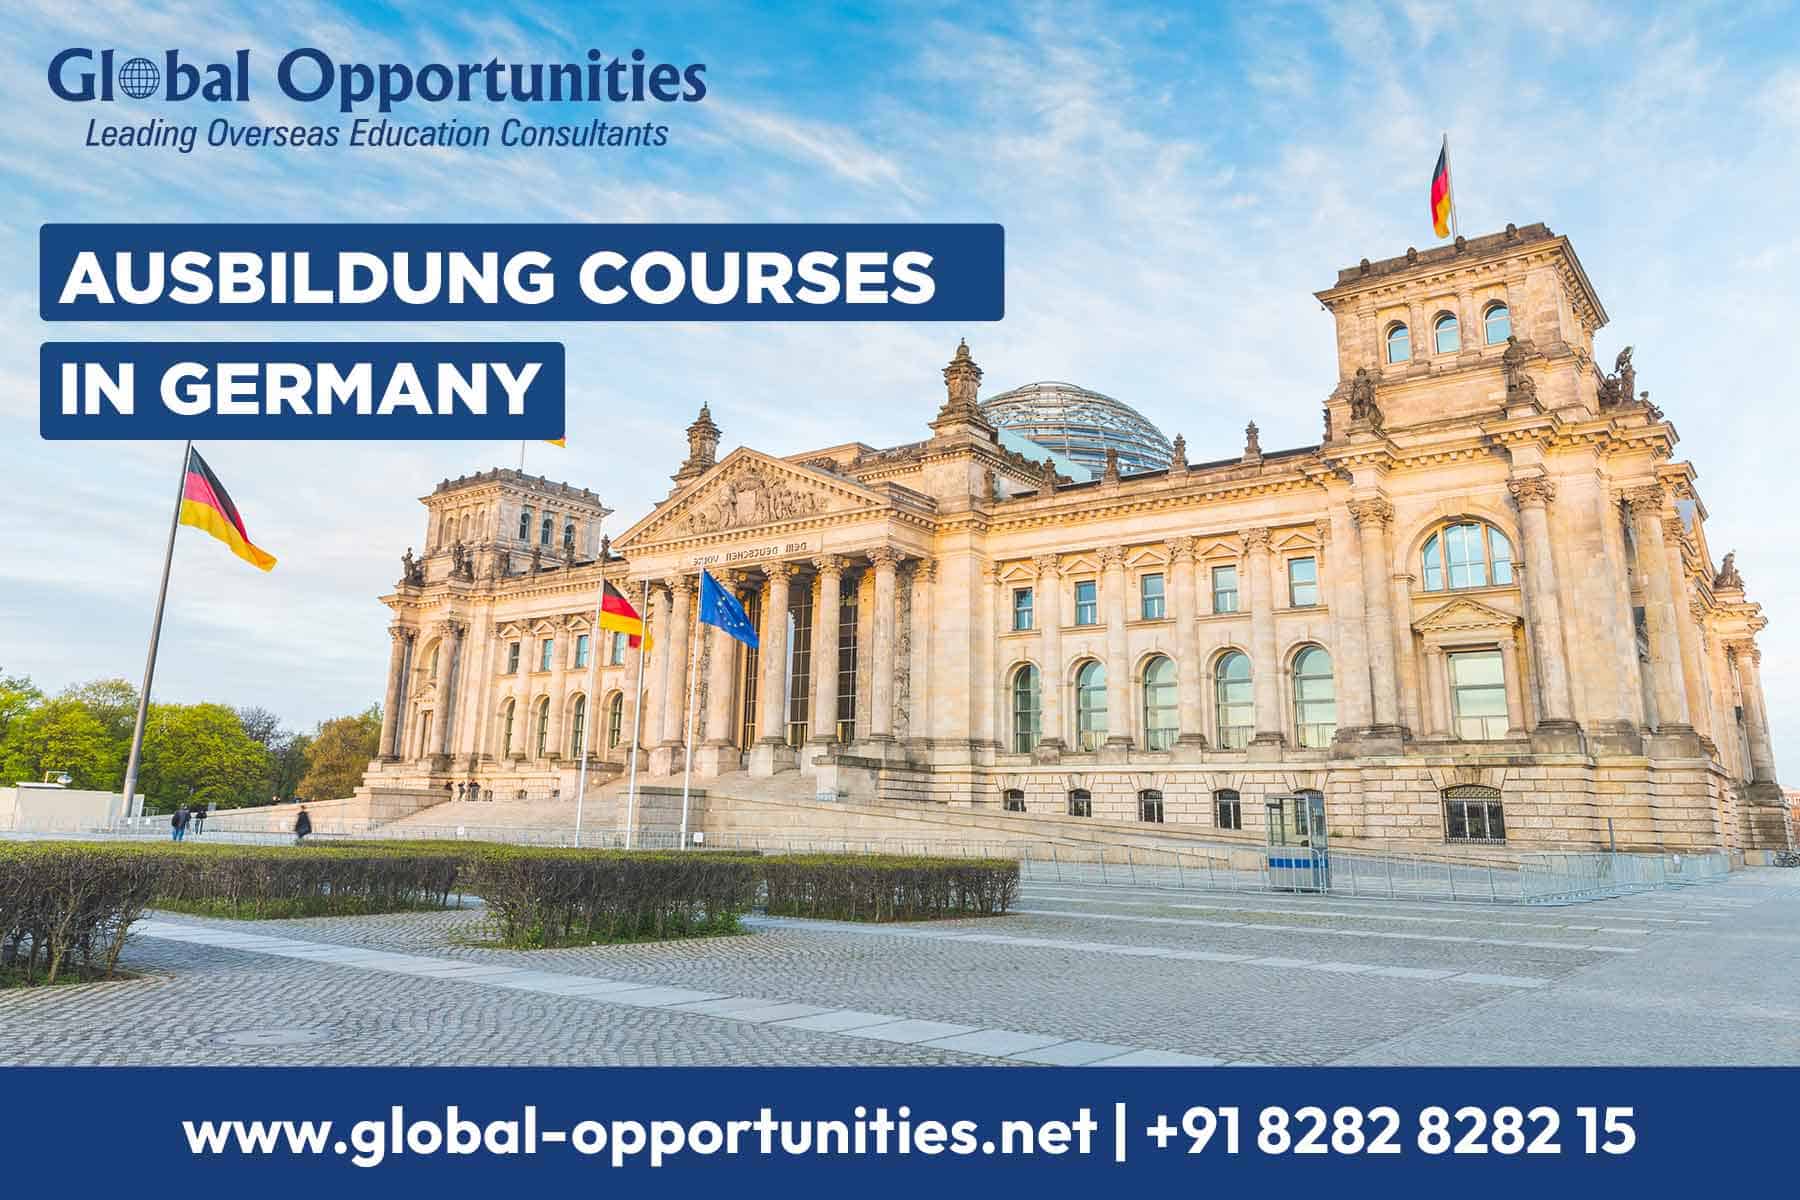 Ausbildung Courses In Germany